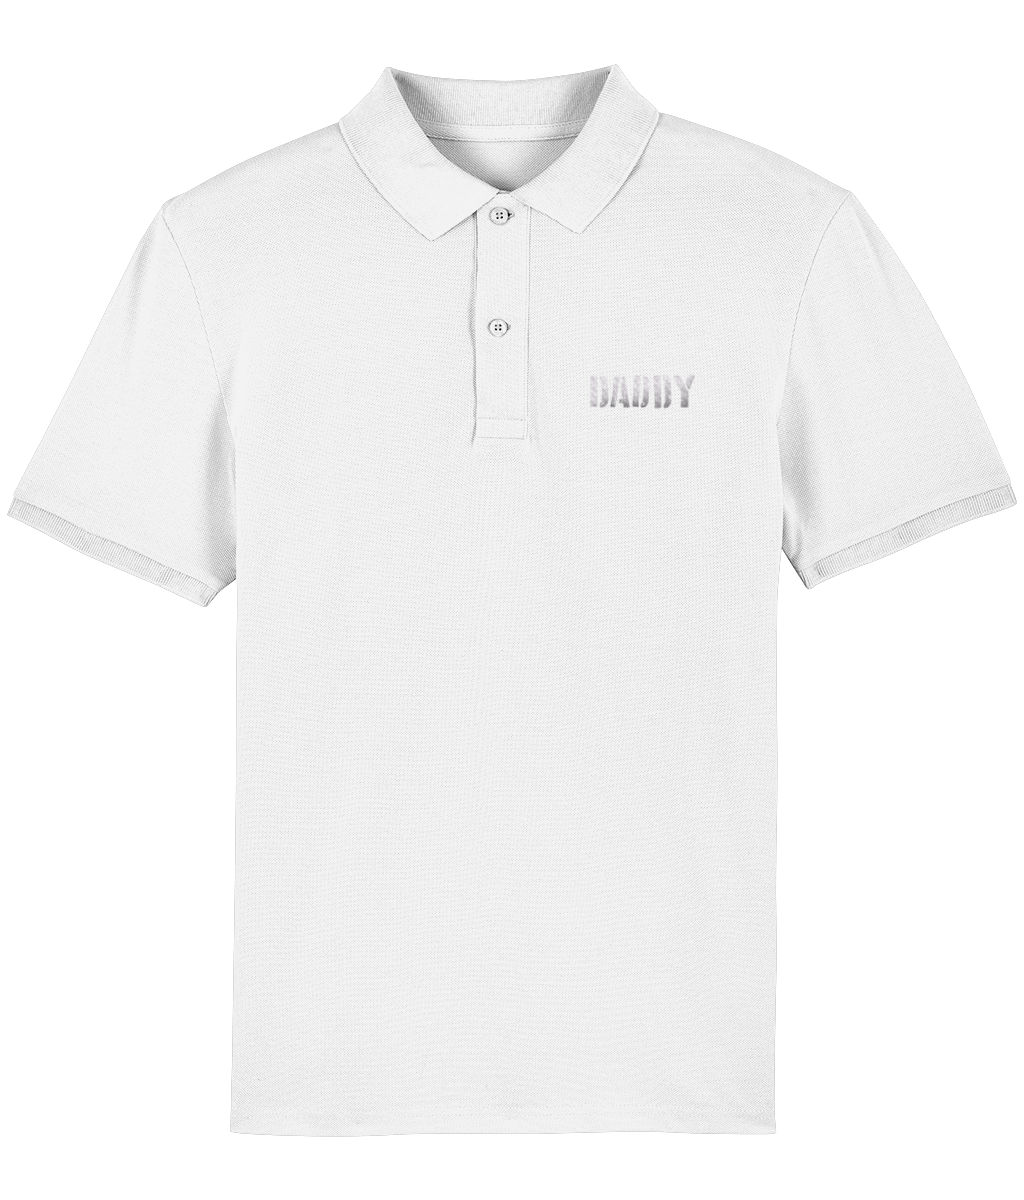 Daddy Organic Cotton Embroidered Polo Shirt